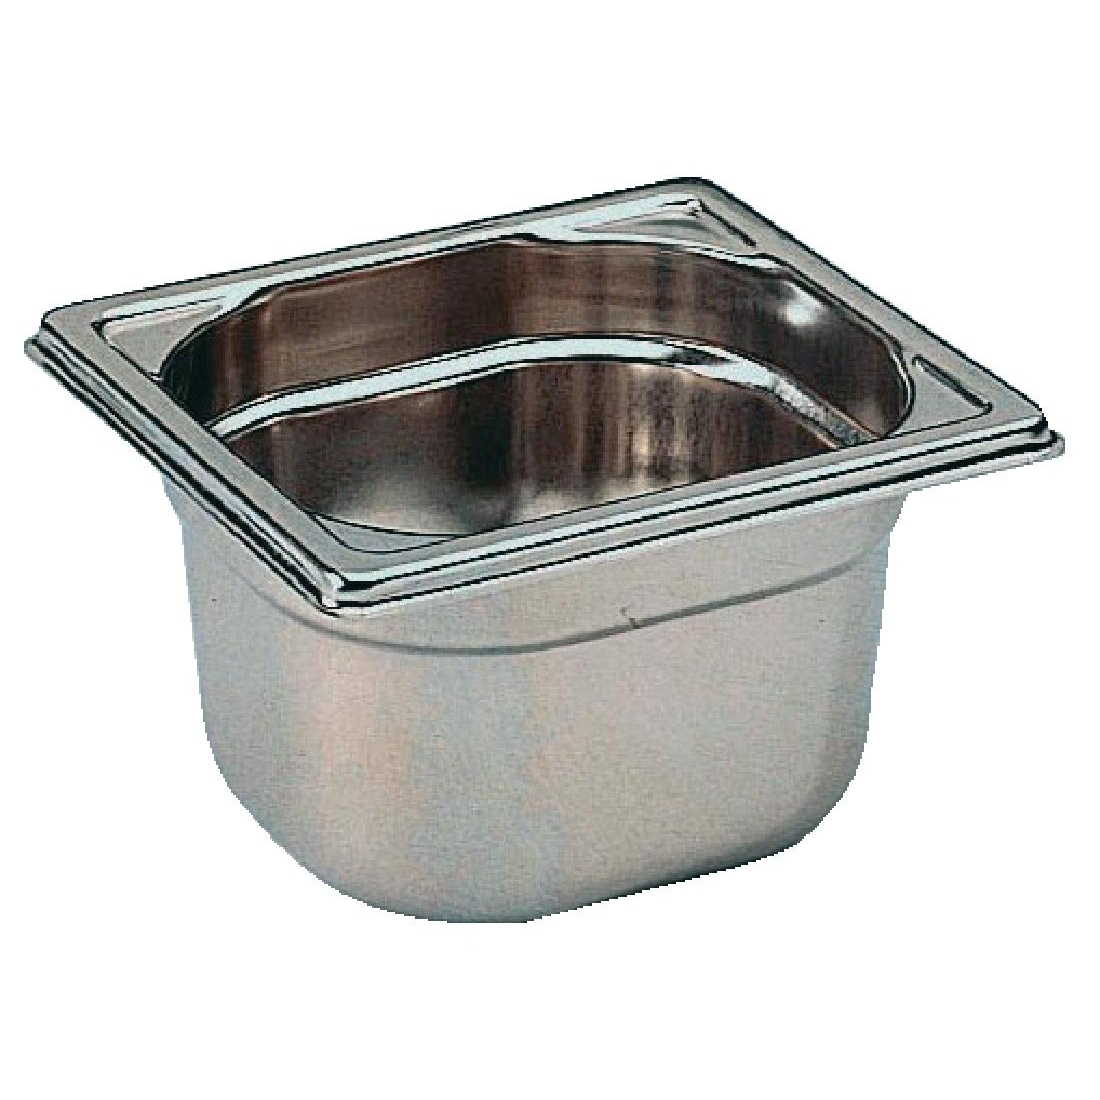 Bourgeat Stainless Steel 1/6 Gastronorm Pan 100mm